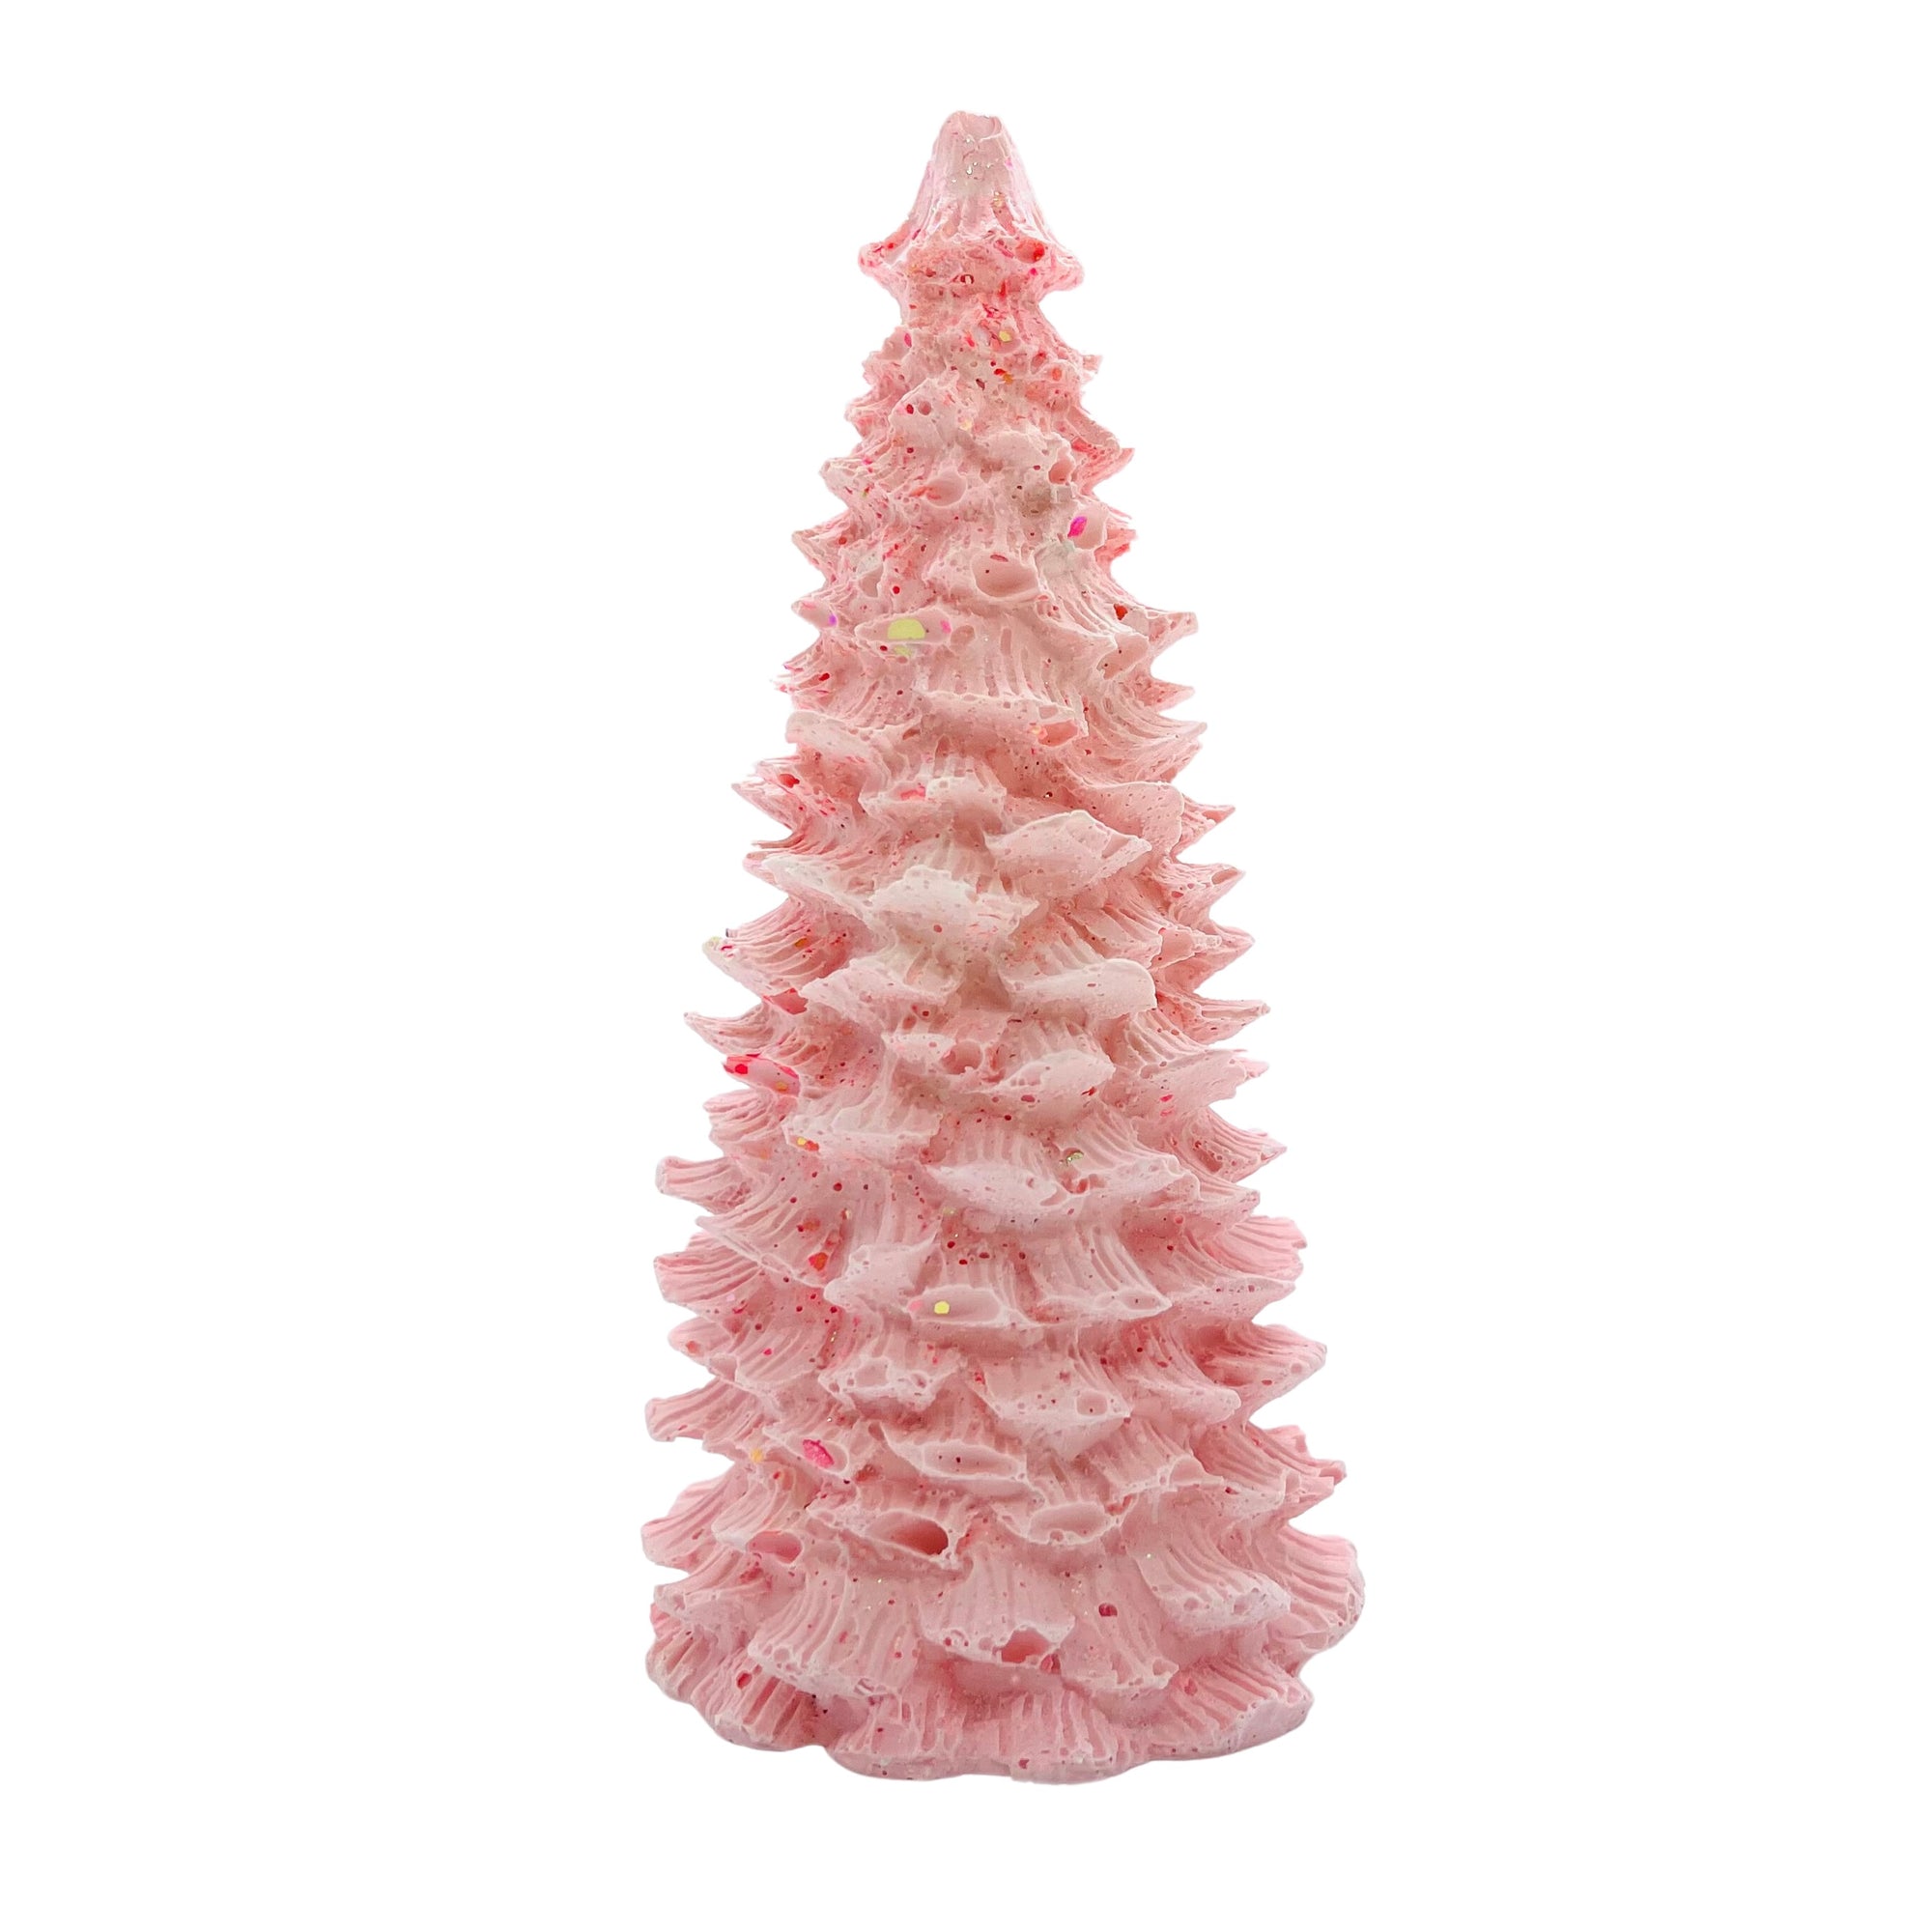 This  tall Jesmonite Christmas tree measures 13.5cm in height and has been marbled with baby pink pigment and pink glitter.